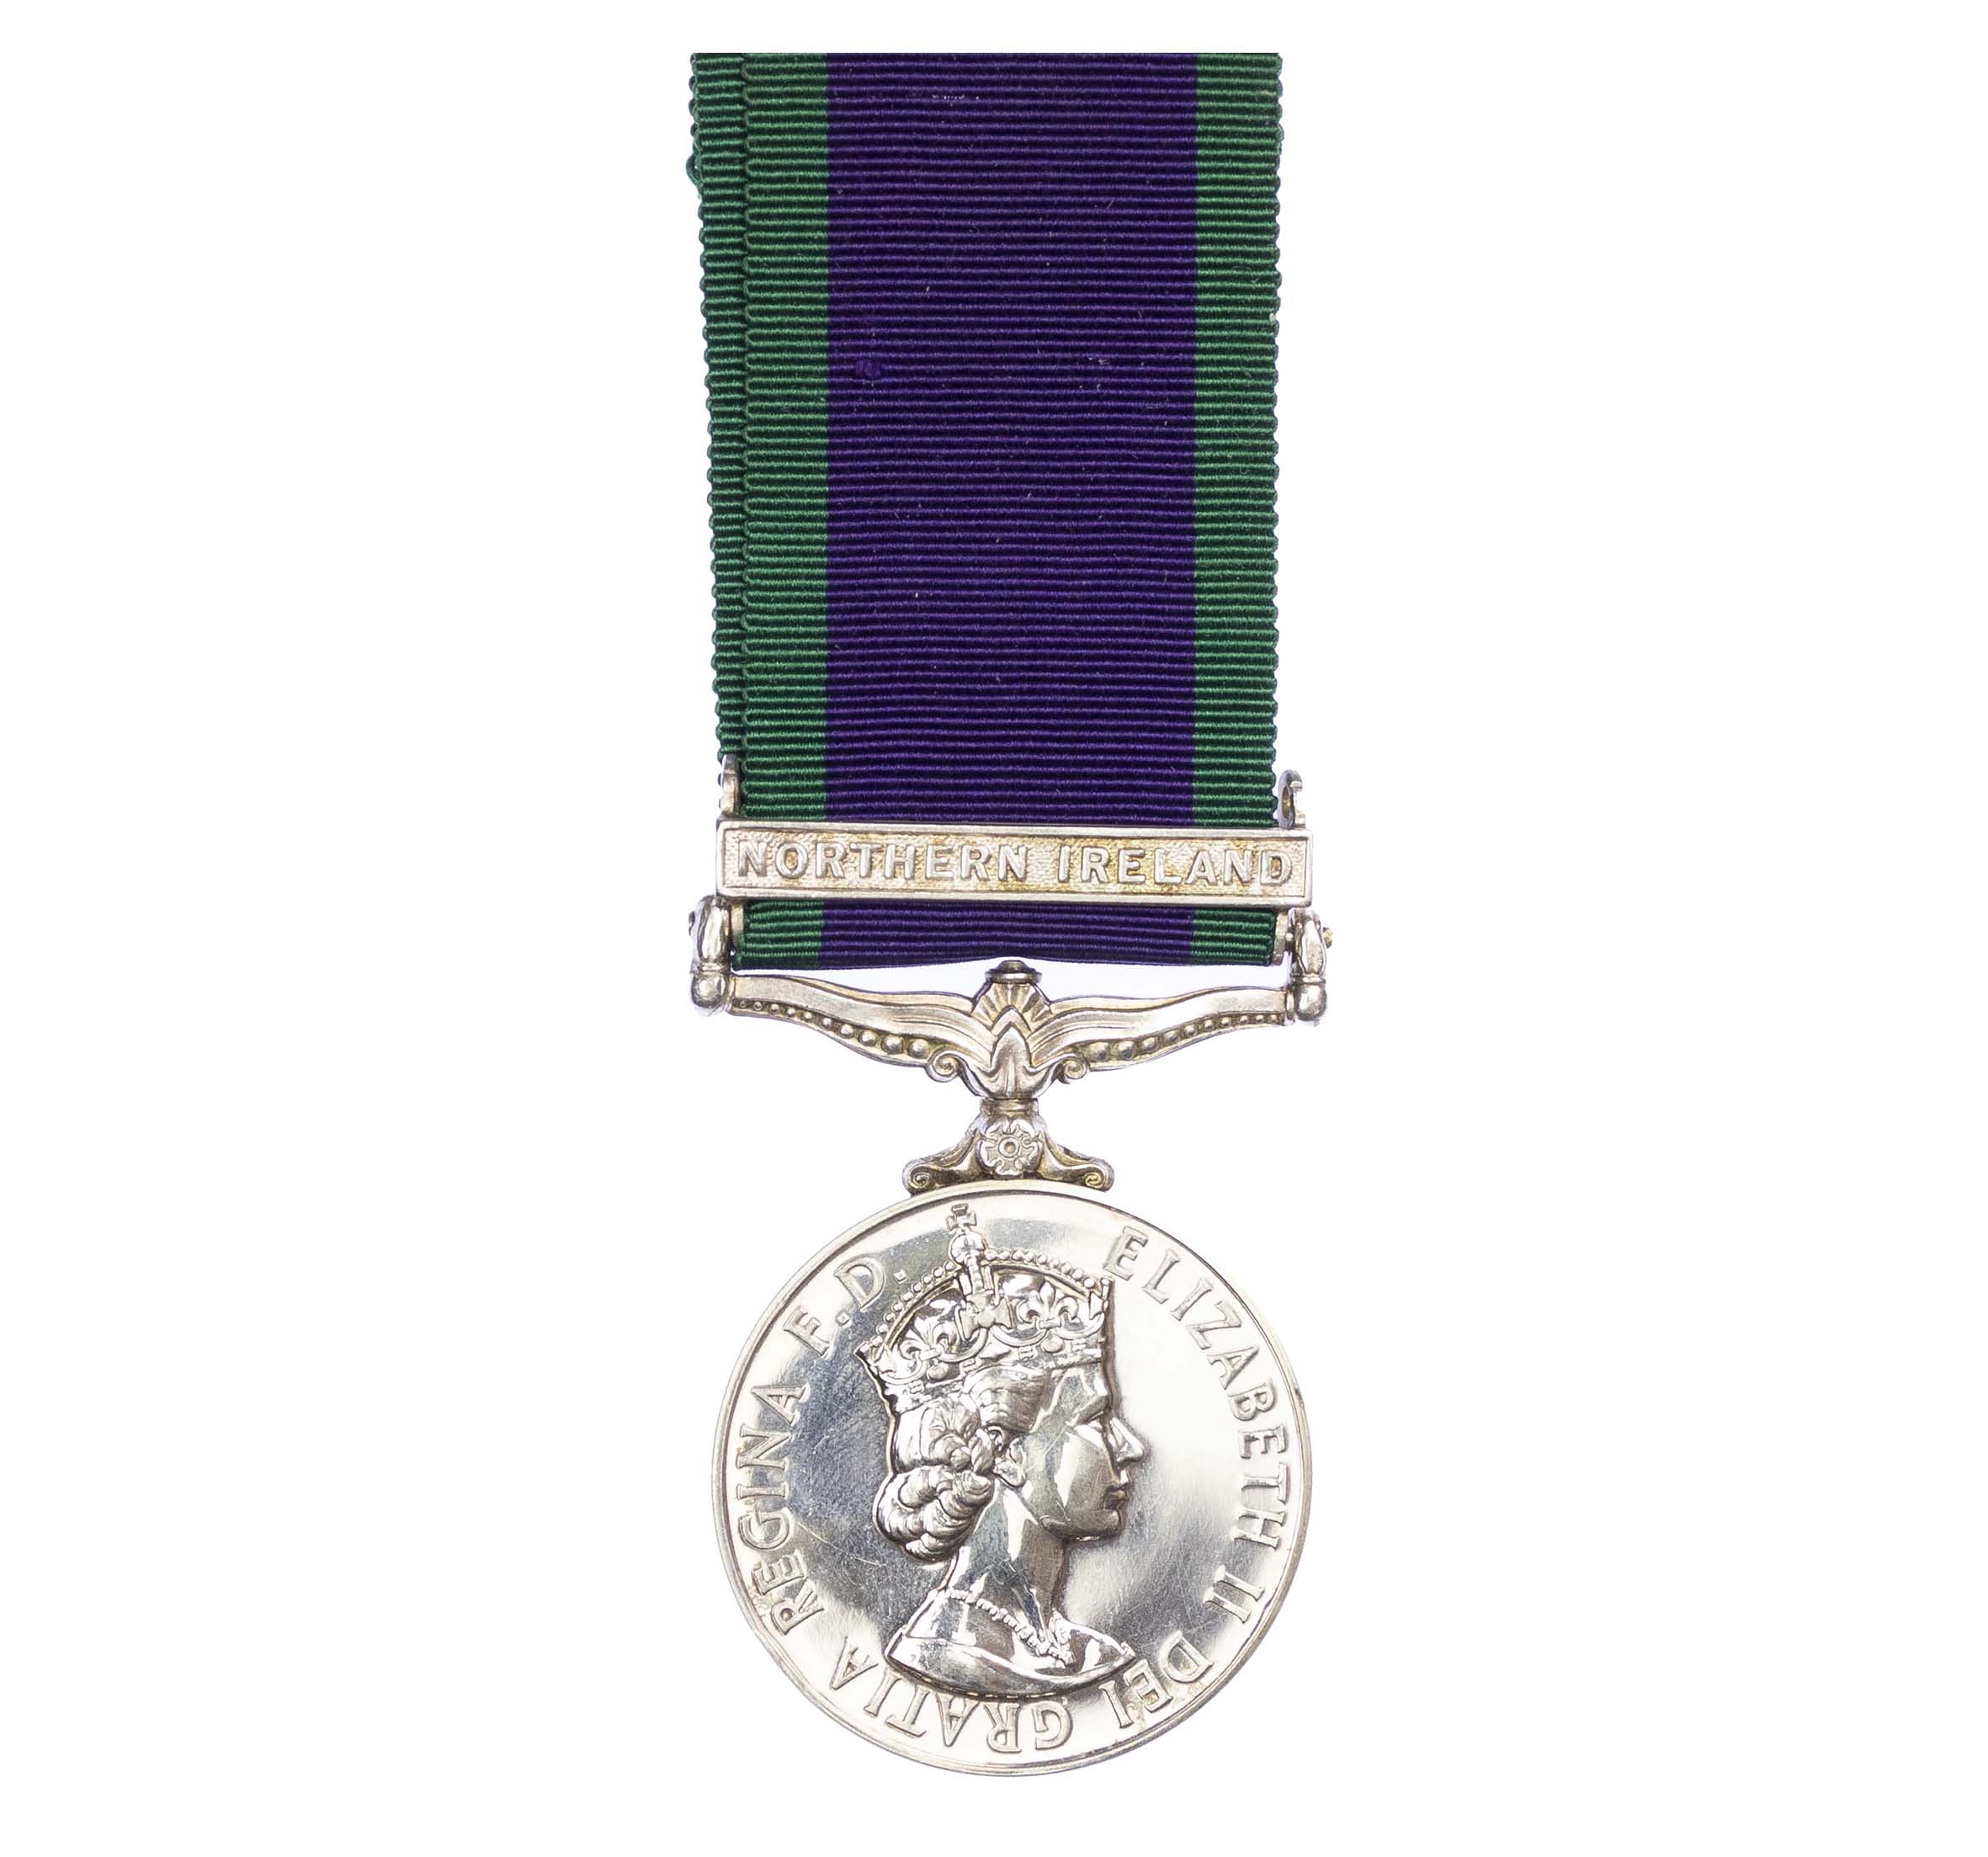 General Service Medal 1962-2007, one clasp Northern Ireland, to Senior Aircraftsman R. Barker